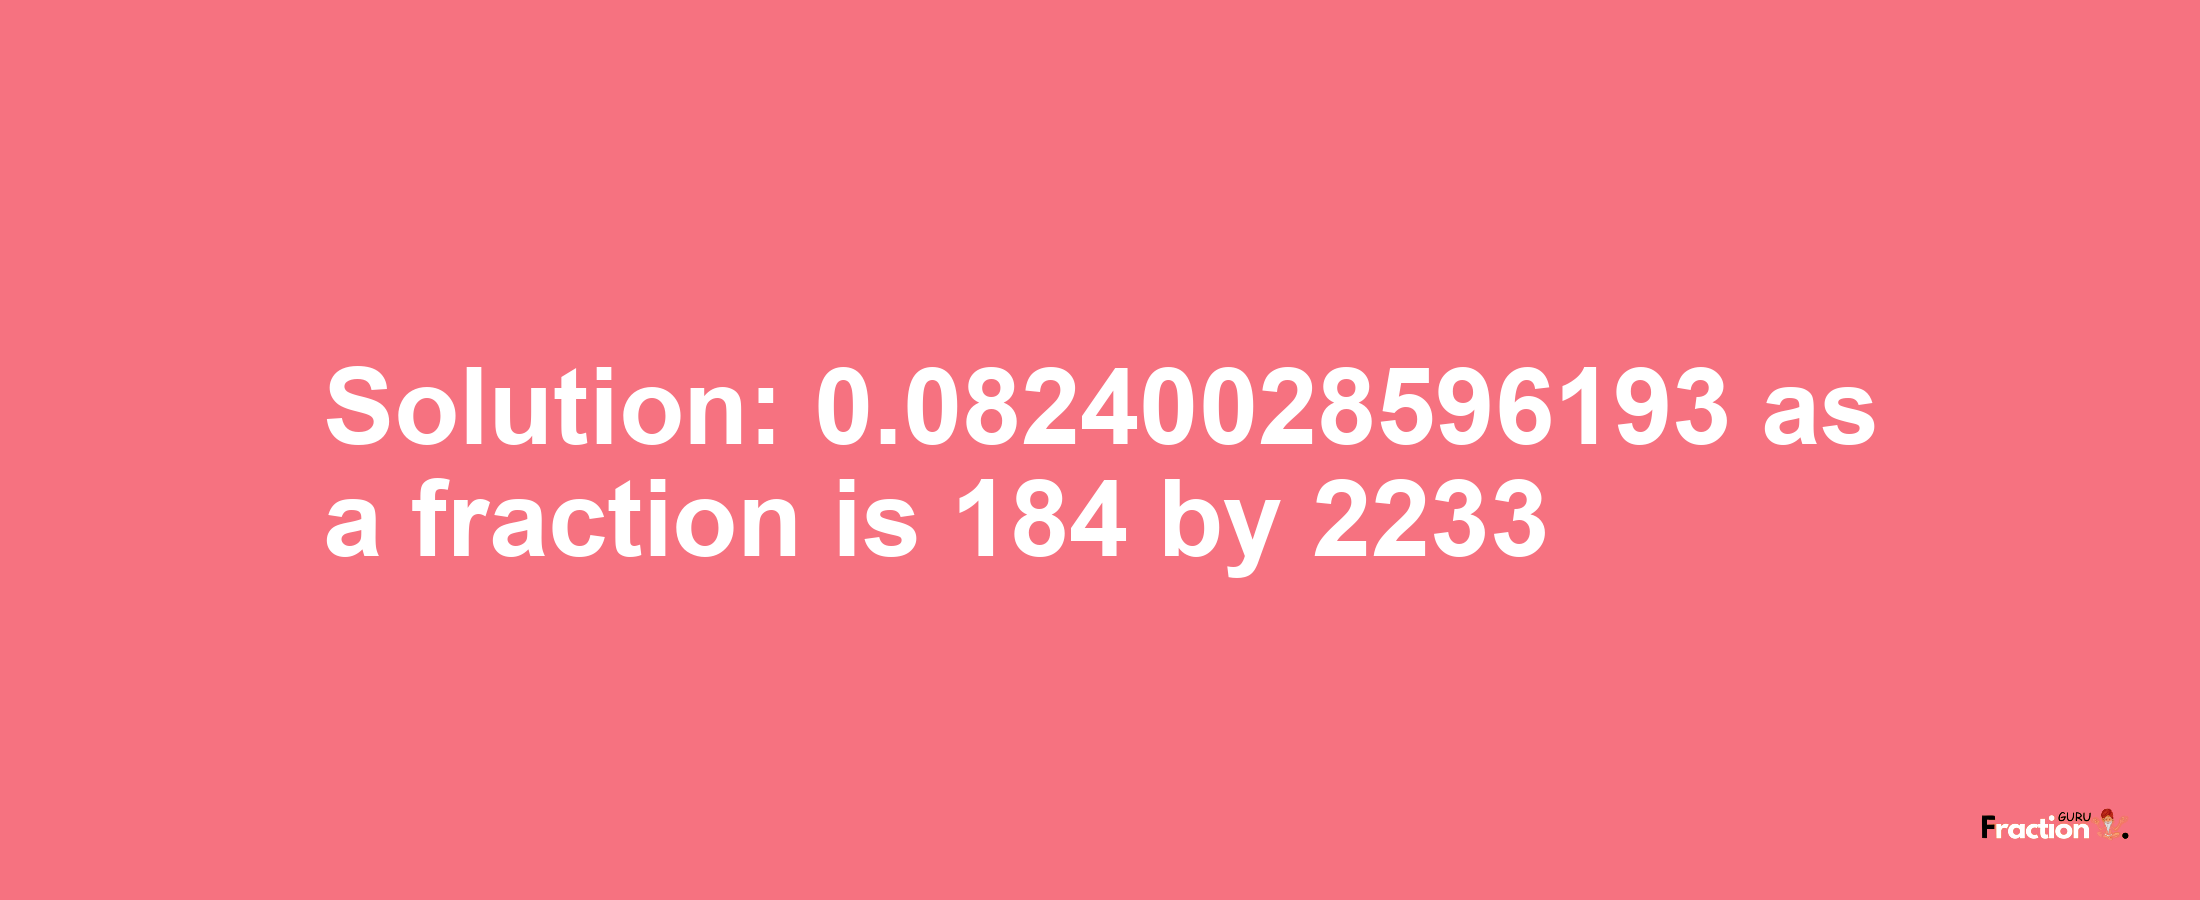 Solution:0.08240028596193 as a fraction is 184/2233